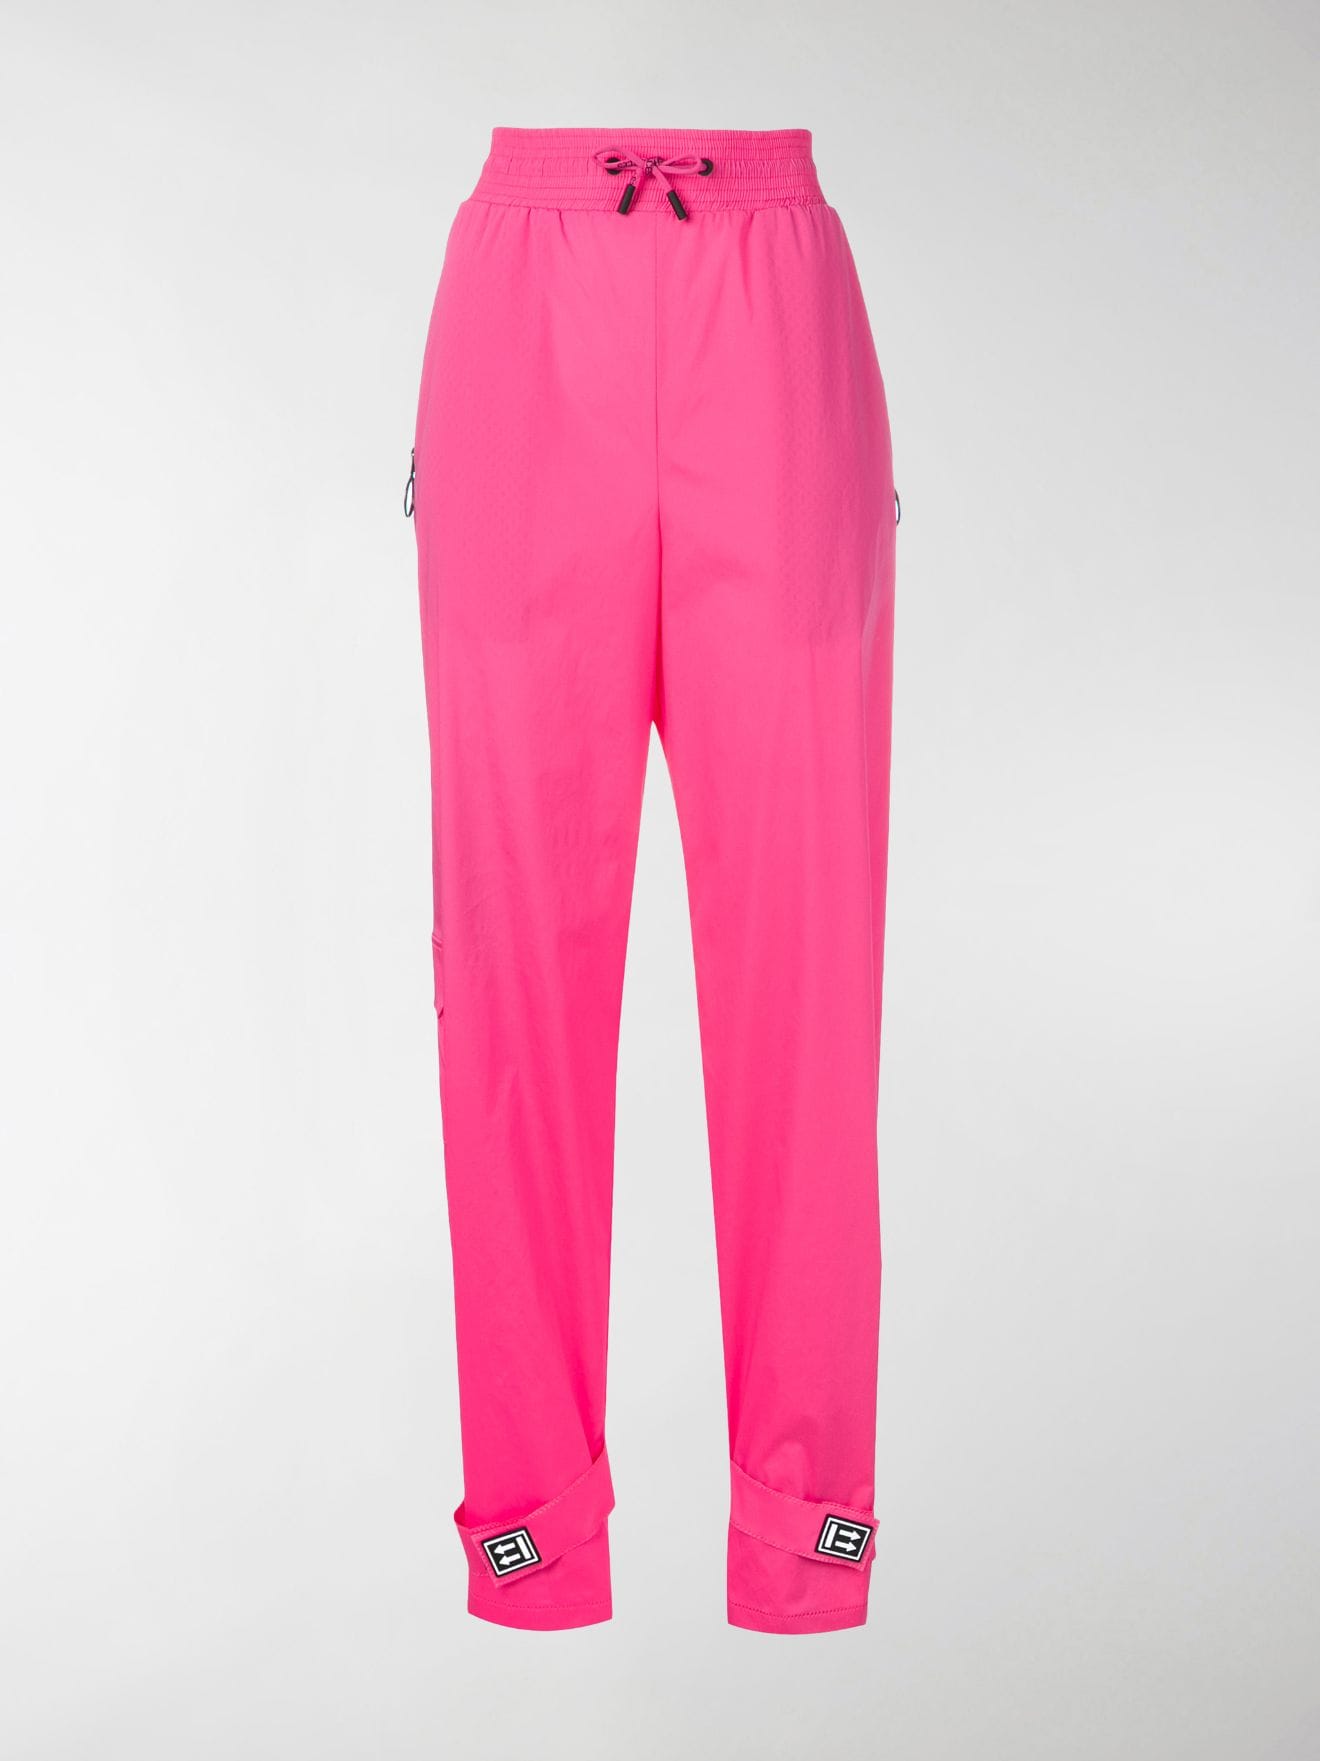 off white pink pants